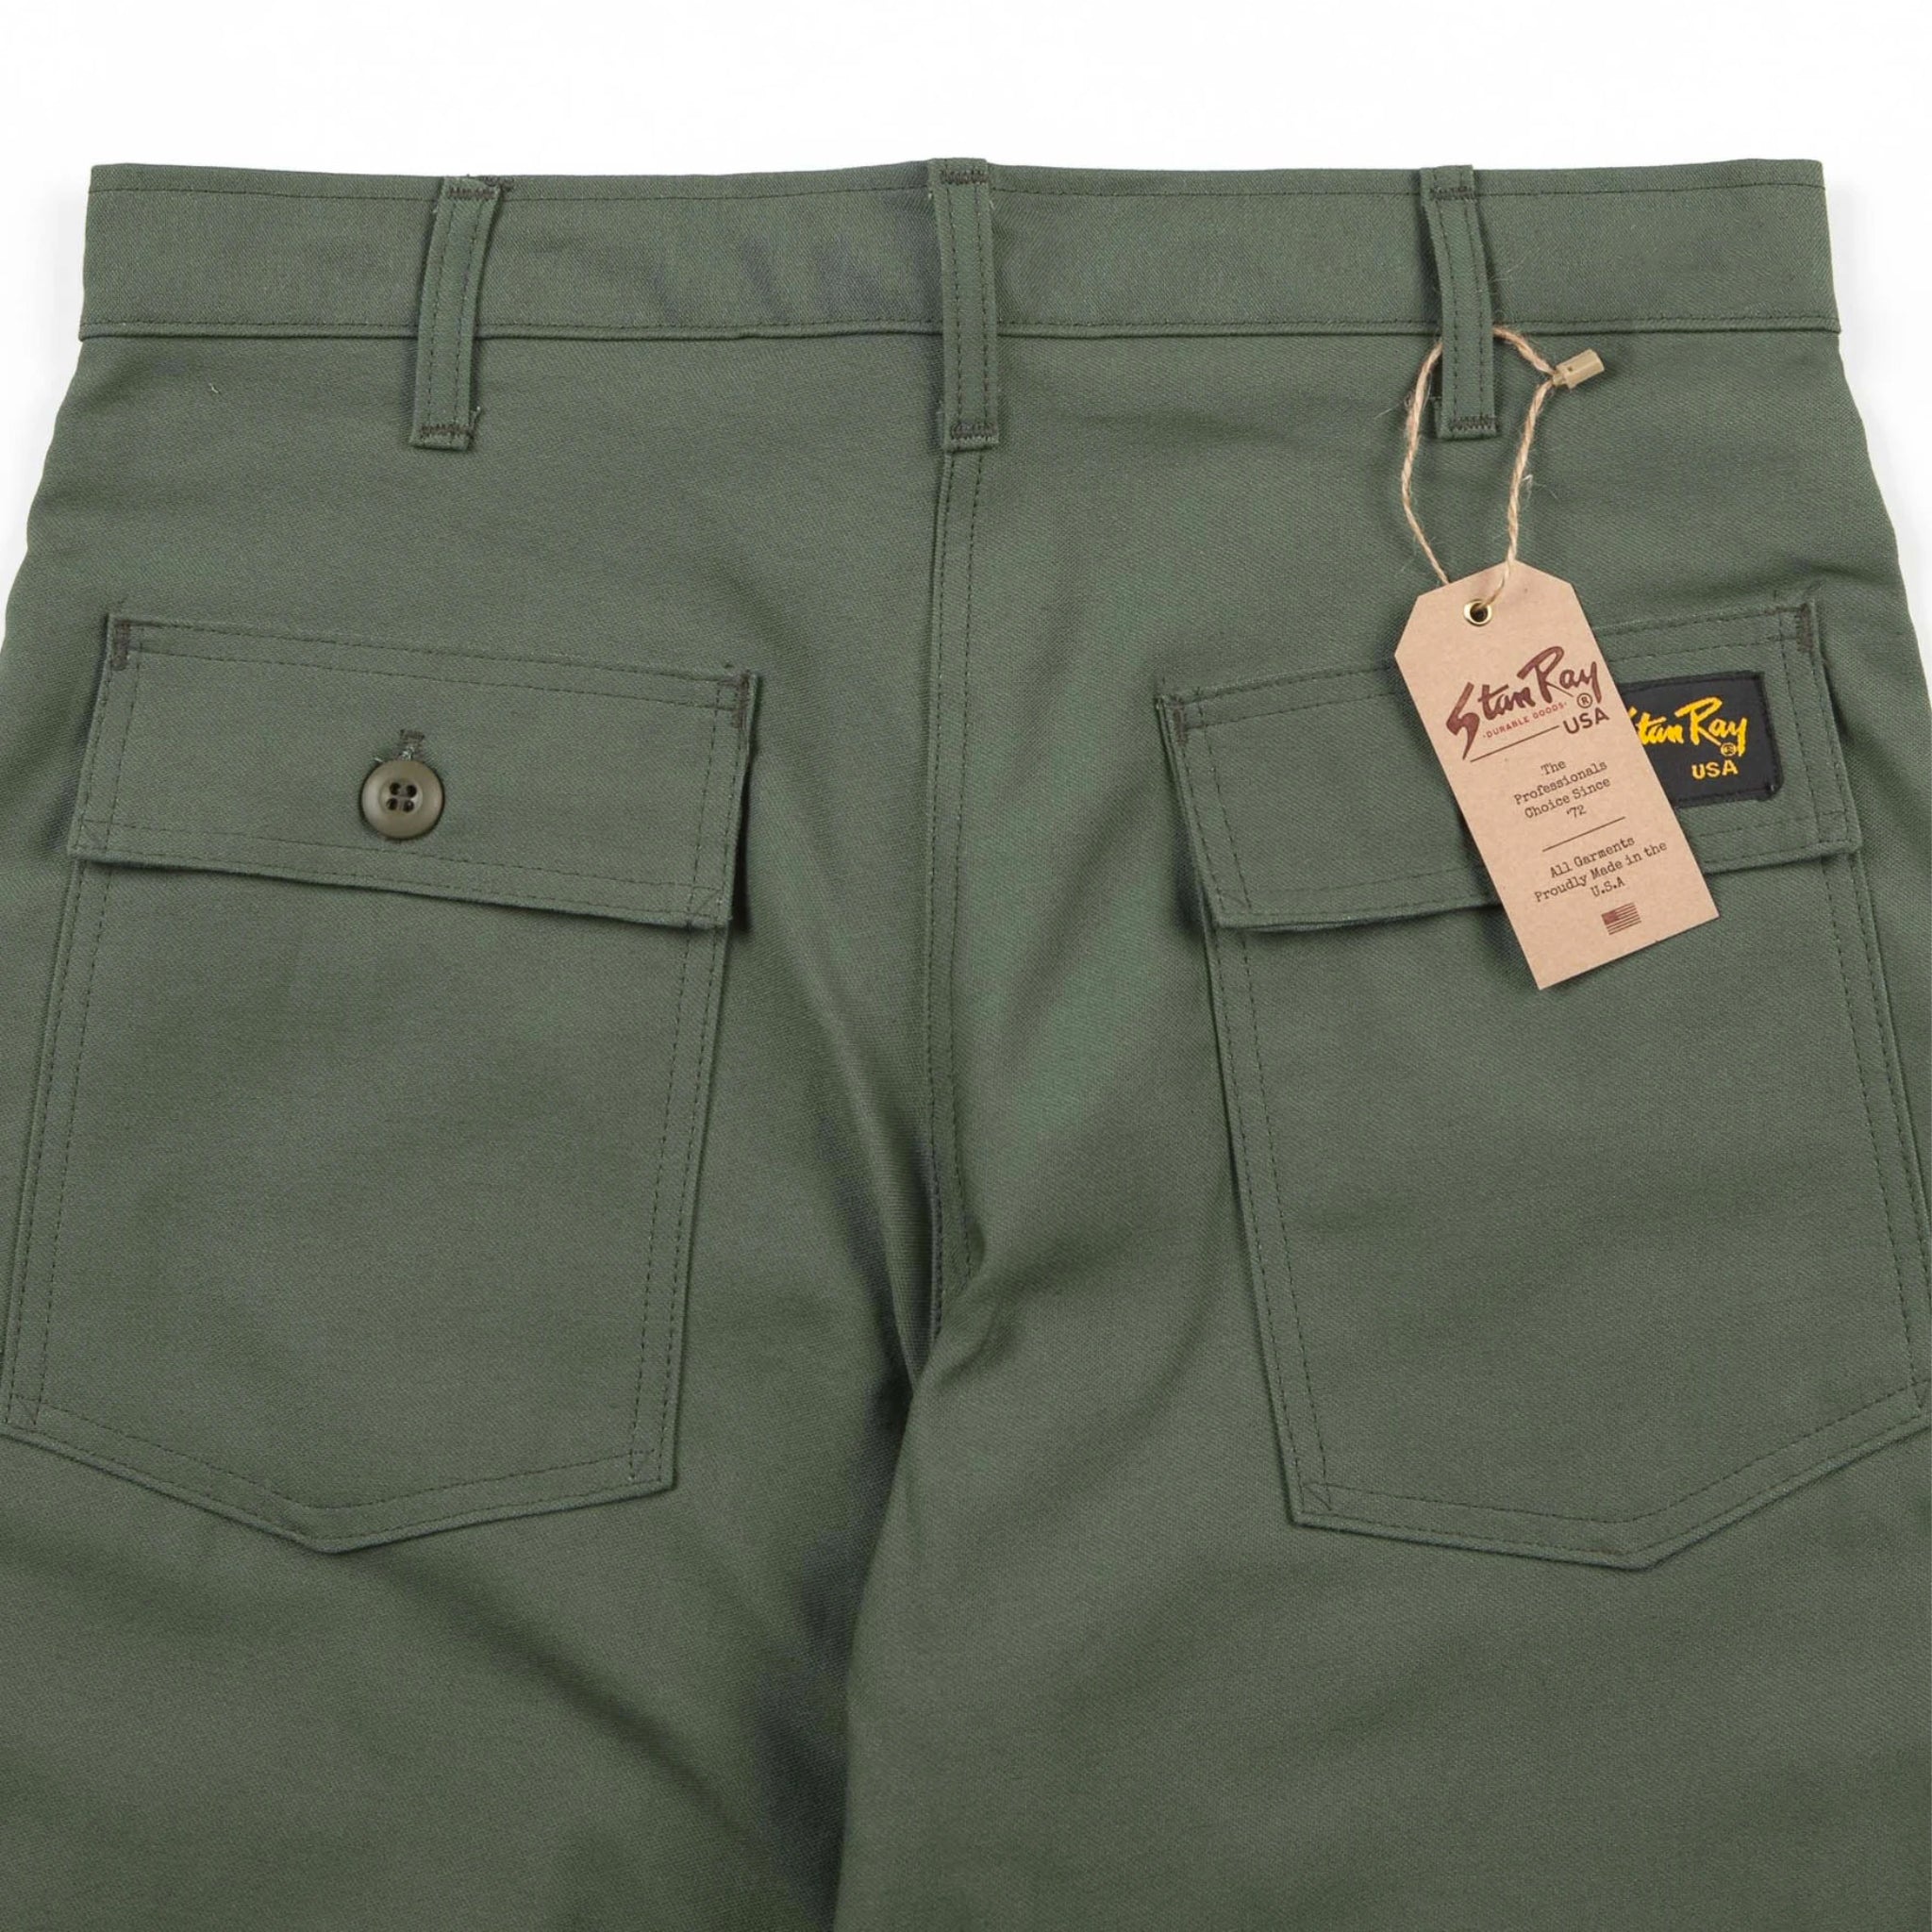 Stan Ray Original Fatigue Pant 1101 (Olive Sateen) - August Shop